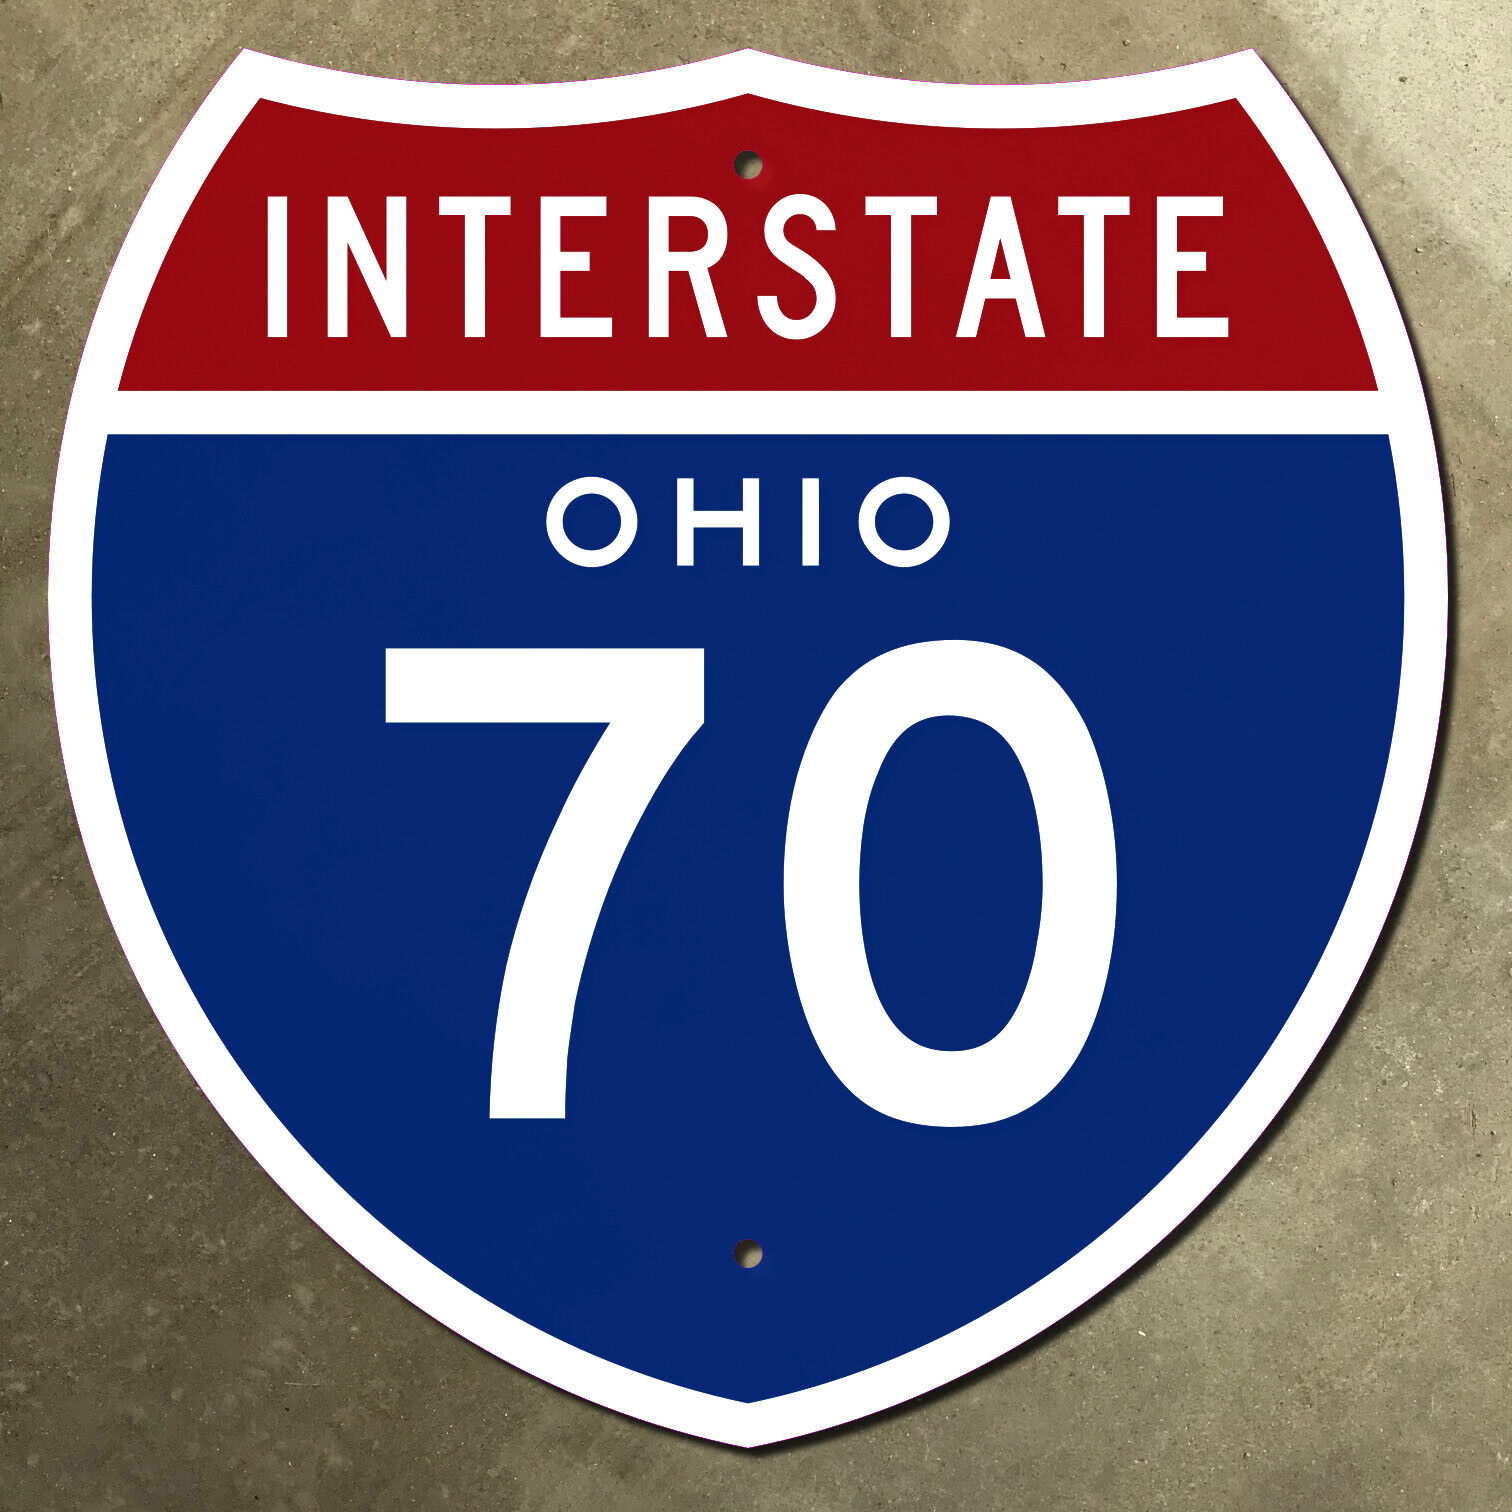 Ohio interstate route 70 highway marker road sign 1957 Columbus Dayton 12x12